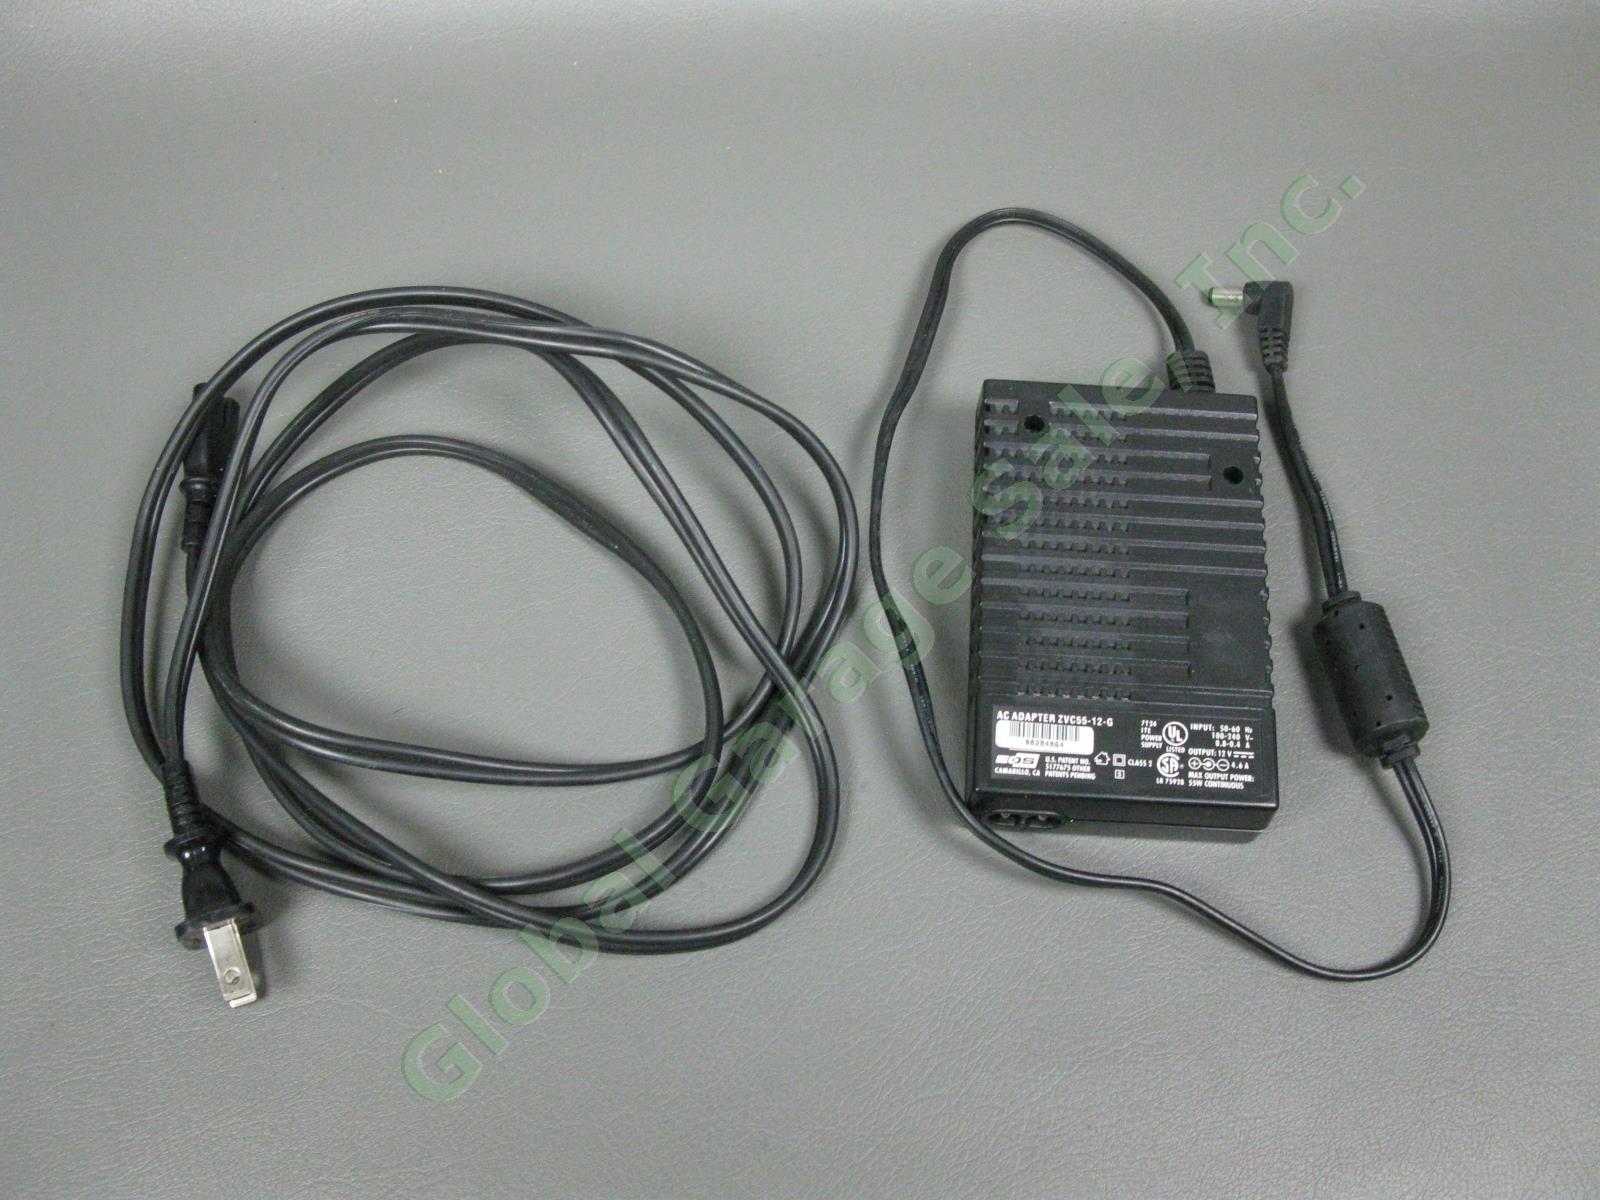 Tadpole SPARCbook 3xp Laptop Computer Charger Manual Solaris Disk Power Supply 7